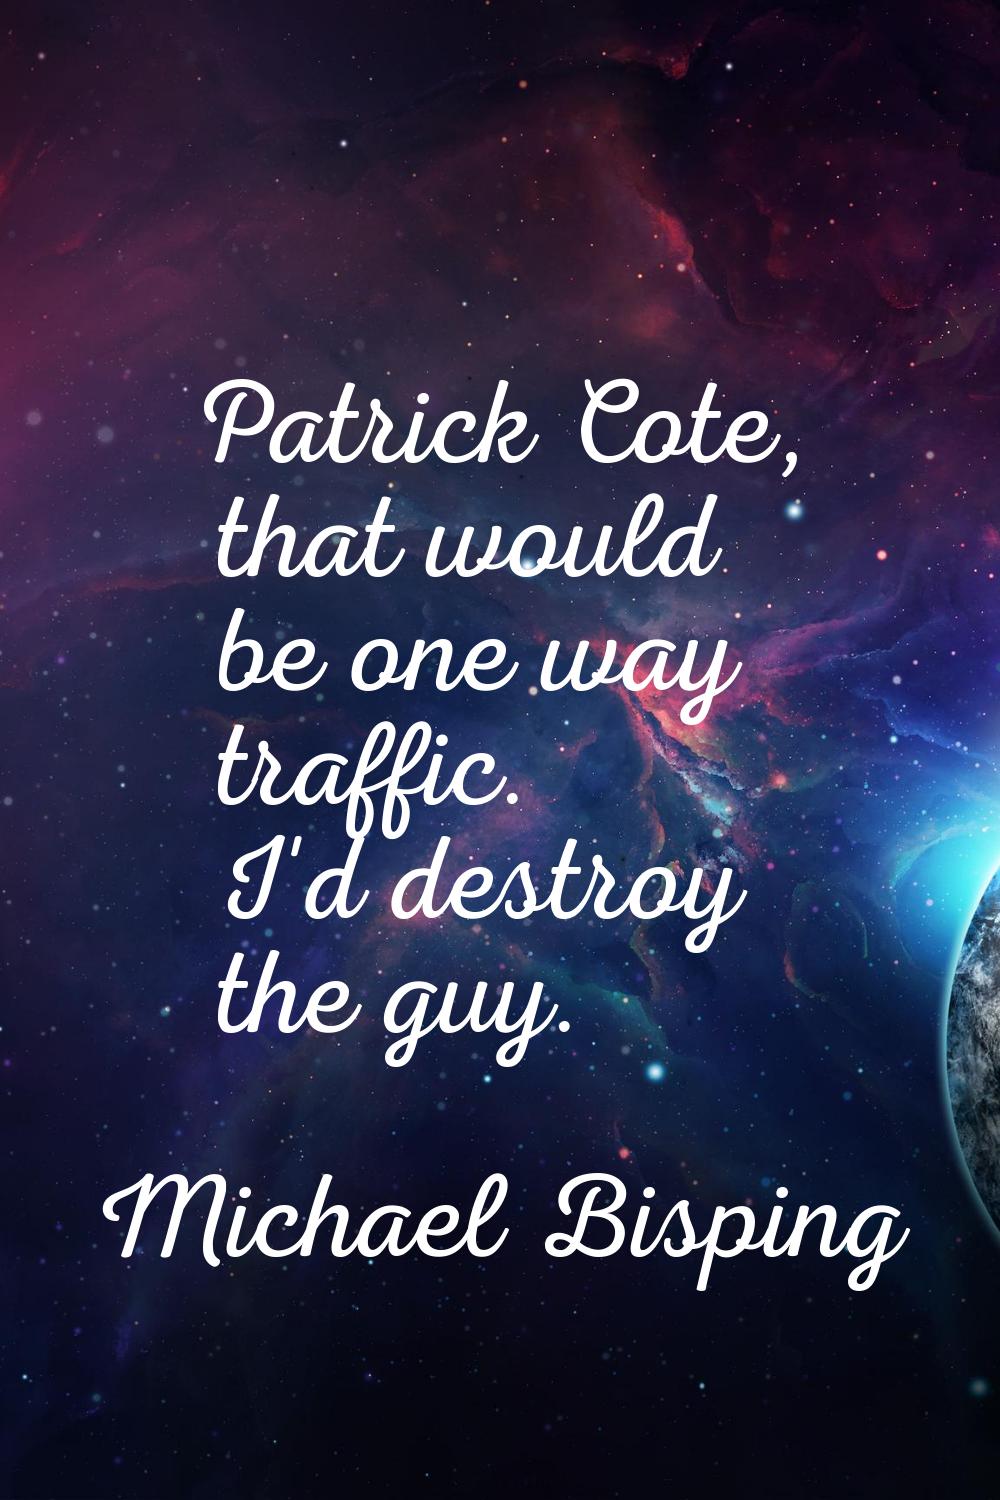 Patrick Cote, that would be one way traffic. I'd destroy the guy.